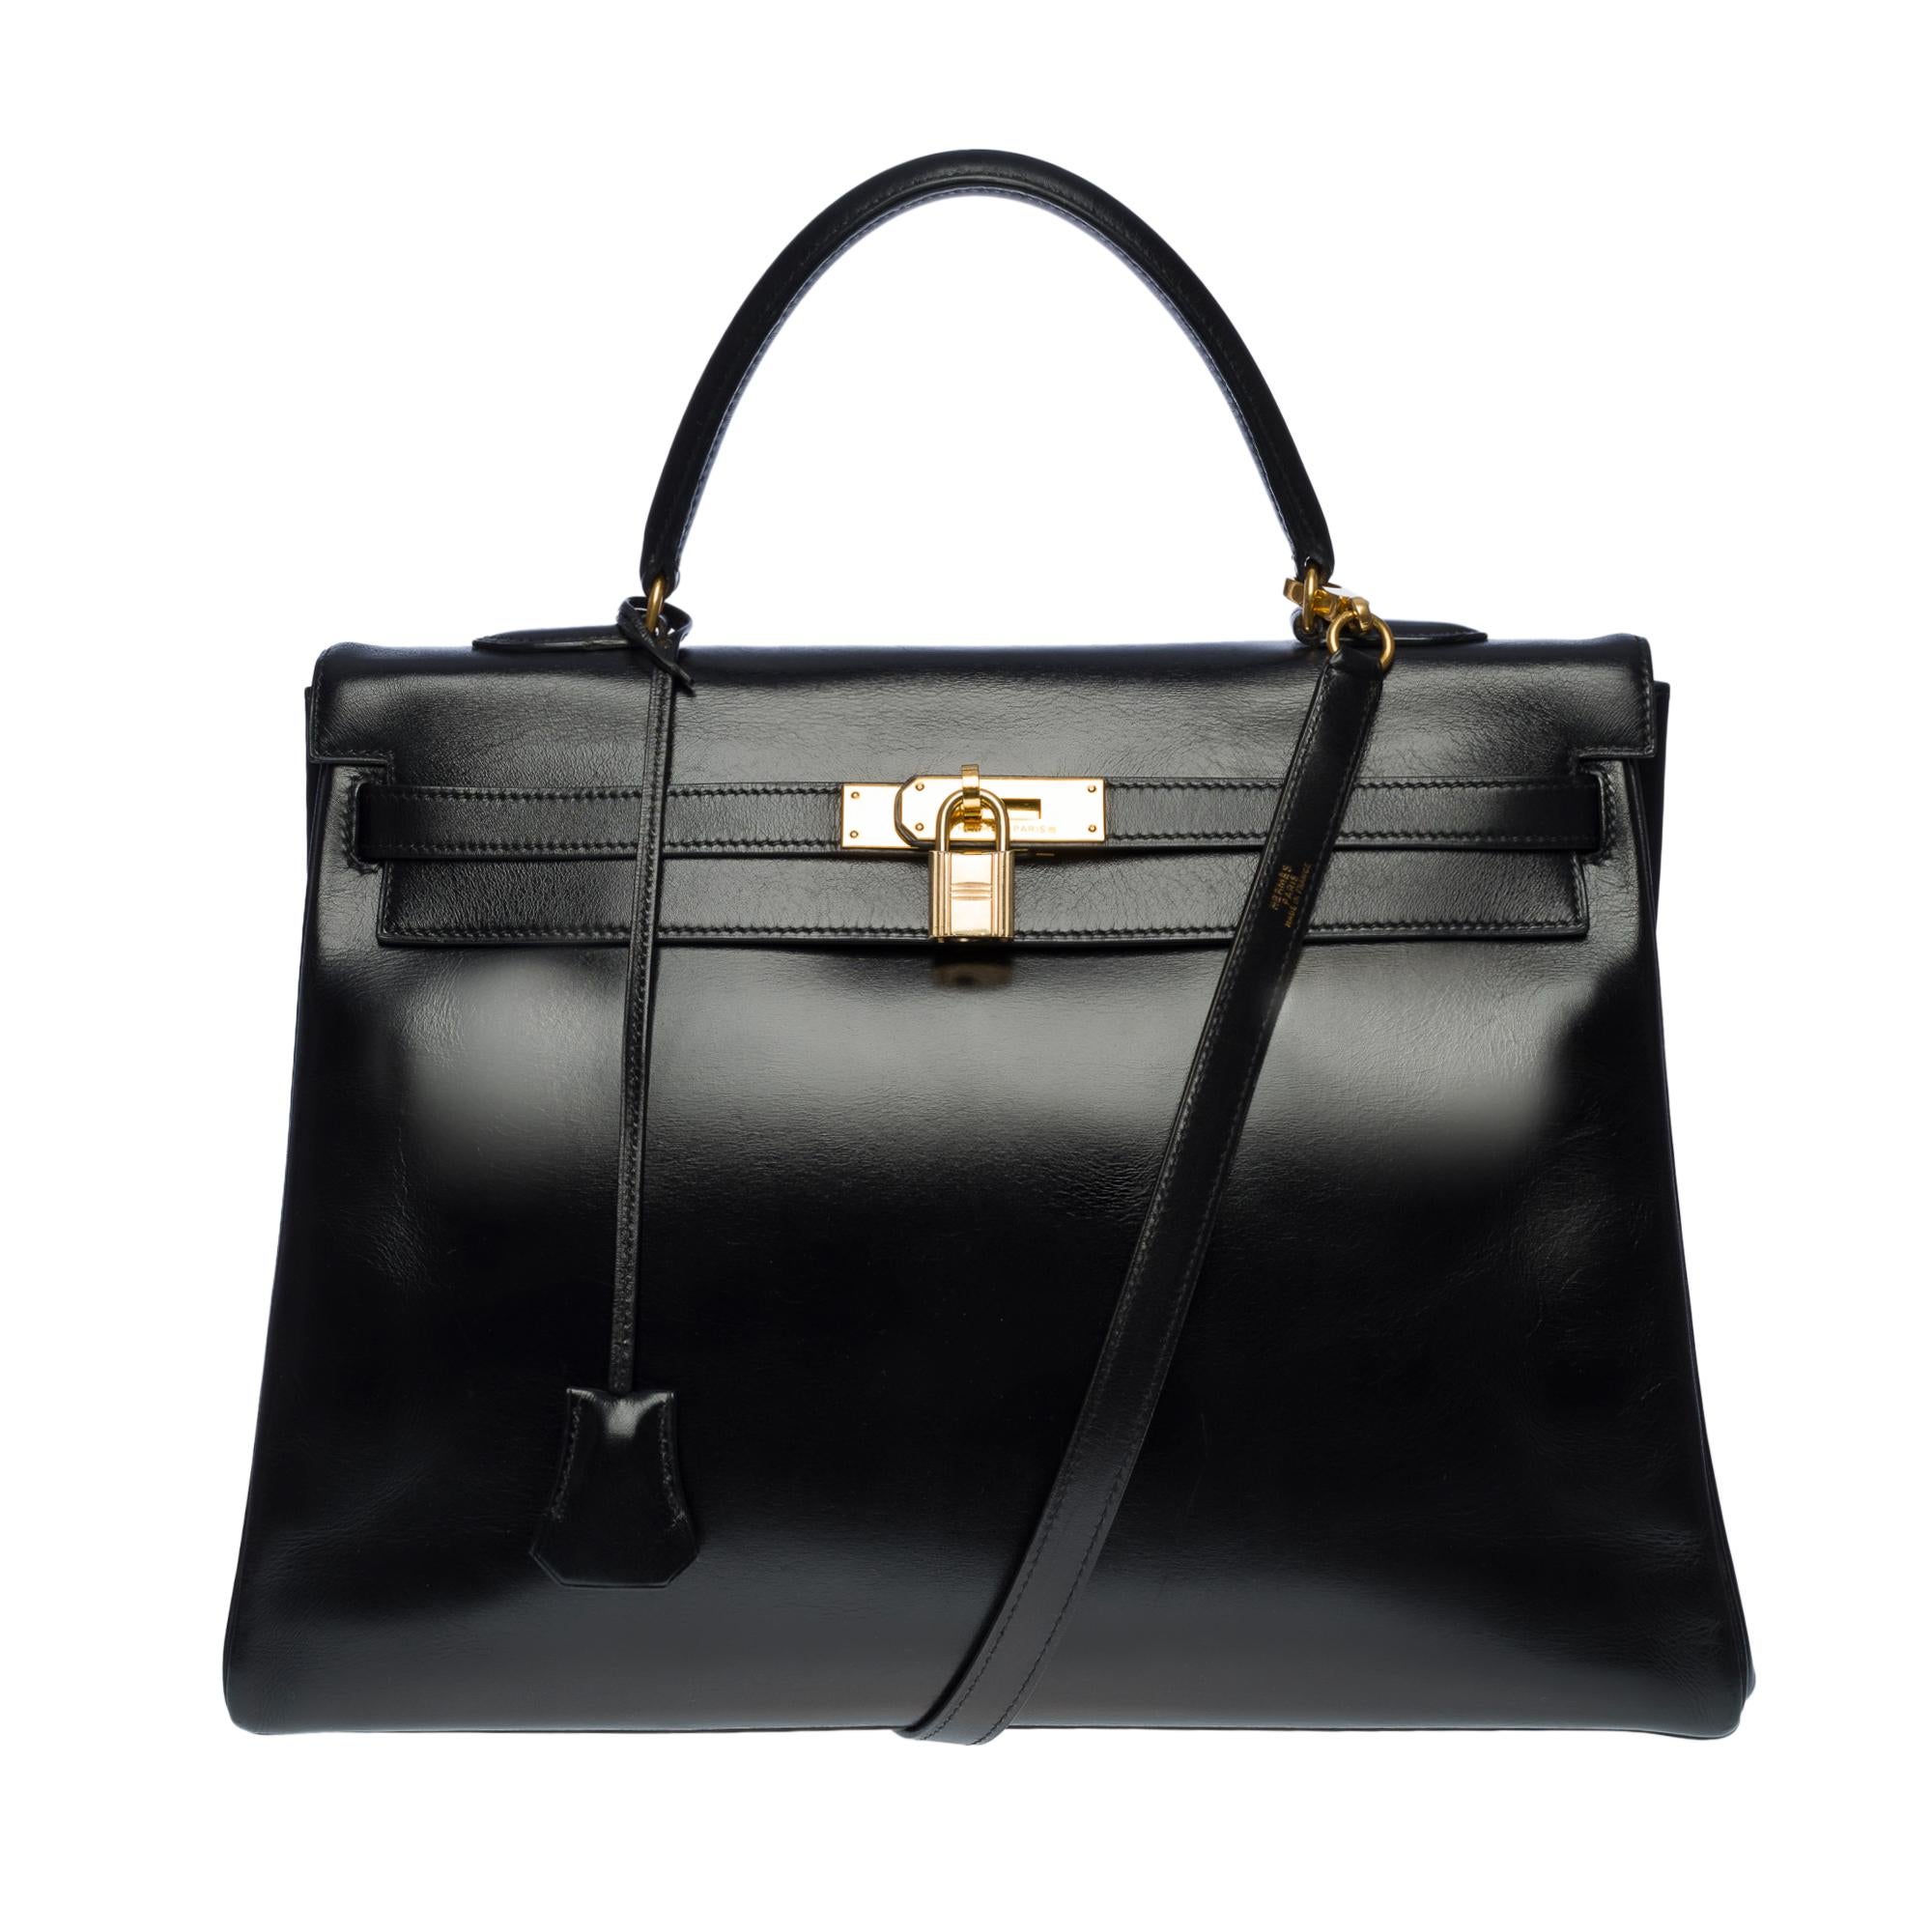 Gorgeous Hermes Kelly 35 retourne handbag strap in Black box Calf leather, gold plated metal hardware, black box leather handle, removable shoulder strap in black box leather for a hand or shoulder support

Flap closure
Black leather lining, one